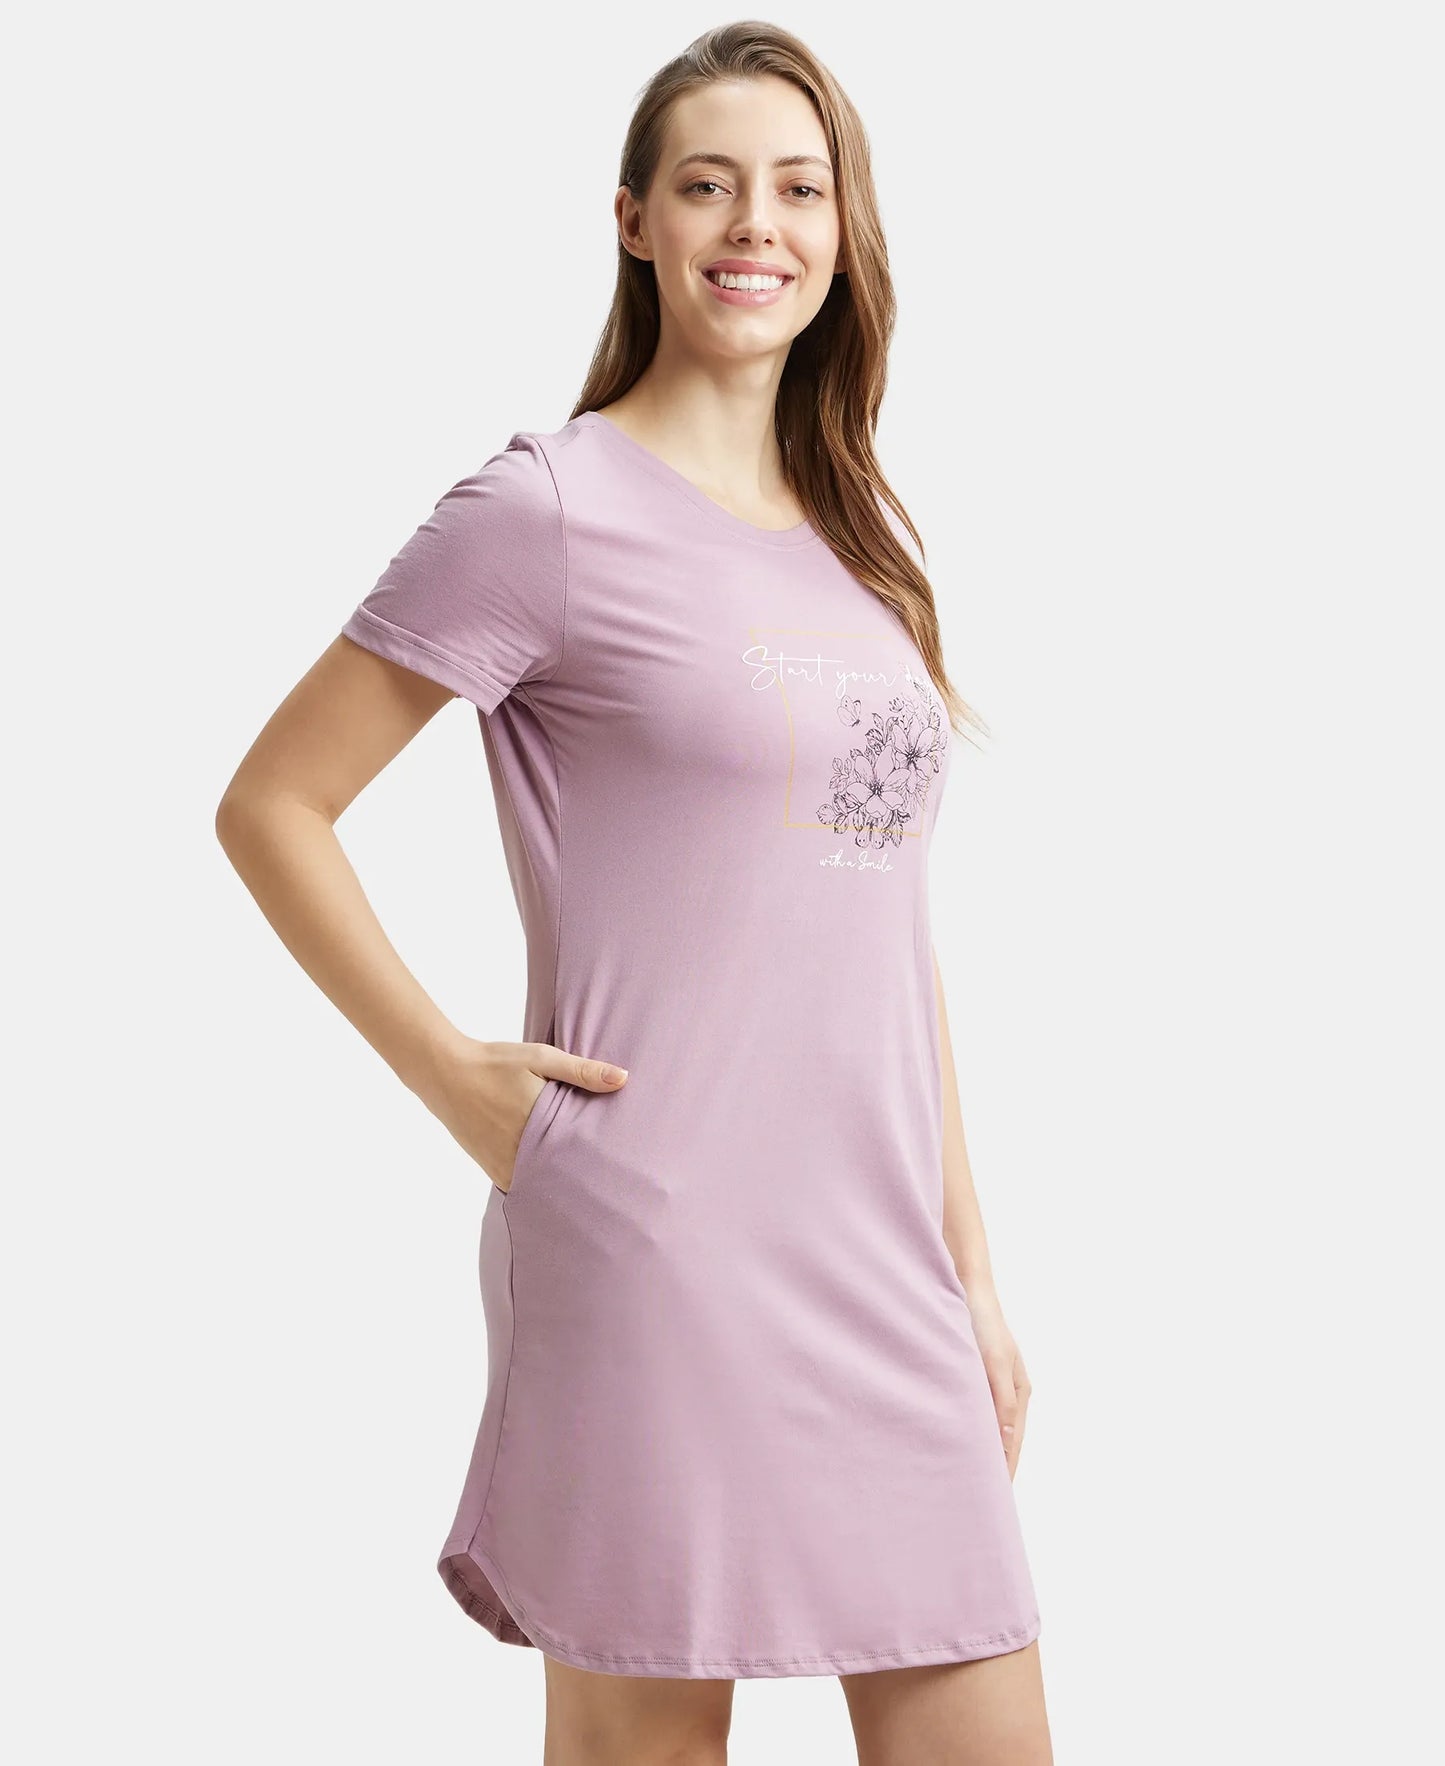 Super Combed Cotton Curved Hem Styled Half Sleeve Printed Sleep Dress with Side Pockets - Old Rose-2